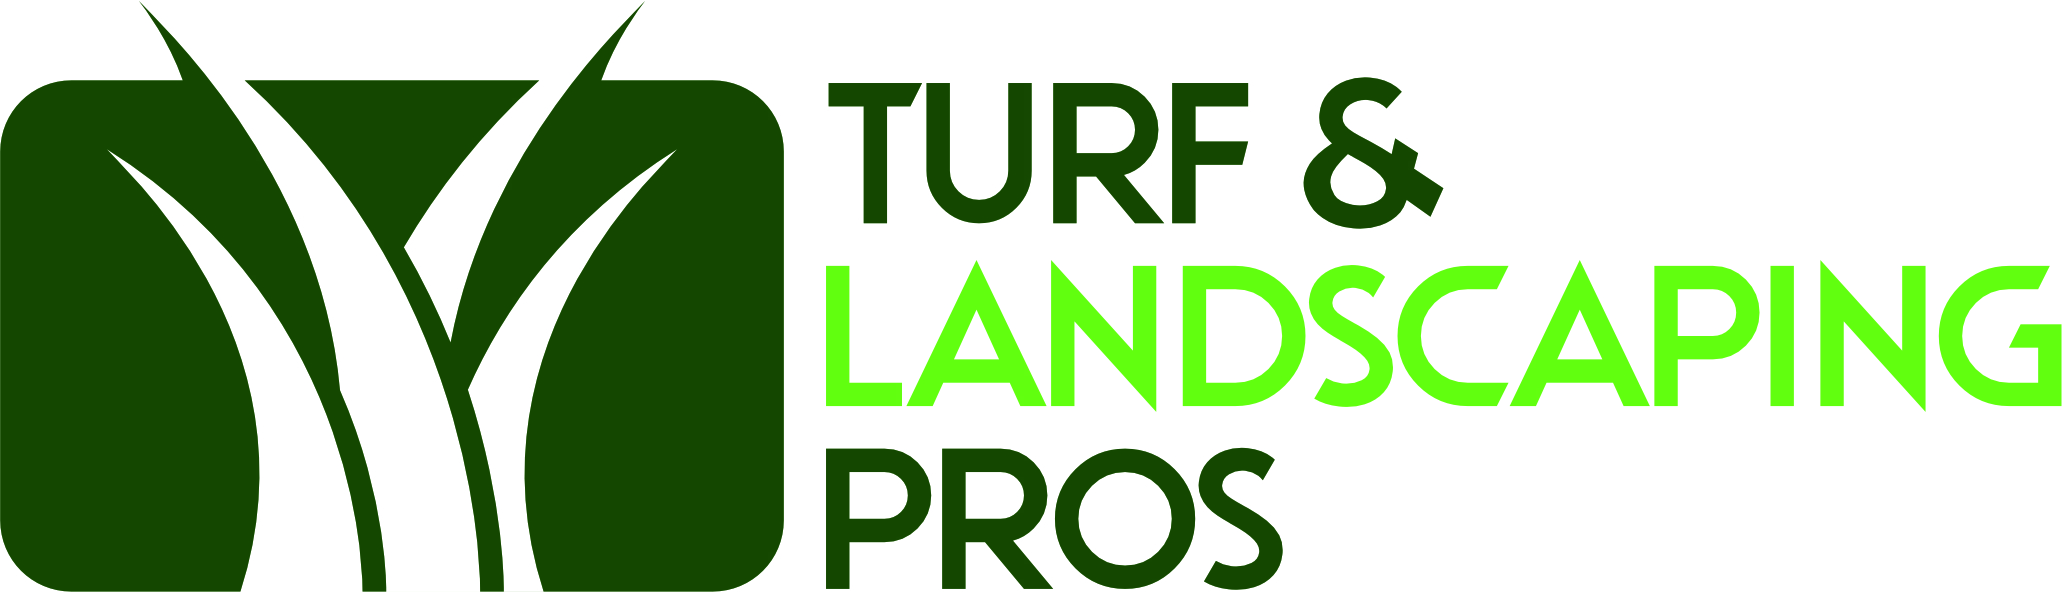 Turf and Landscaping Pros Logo